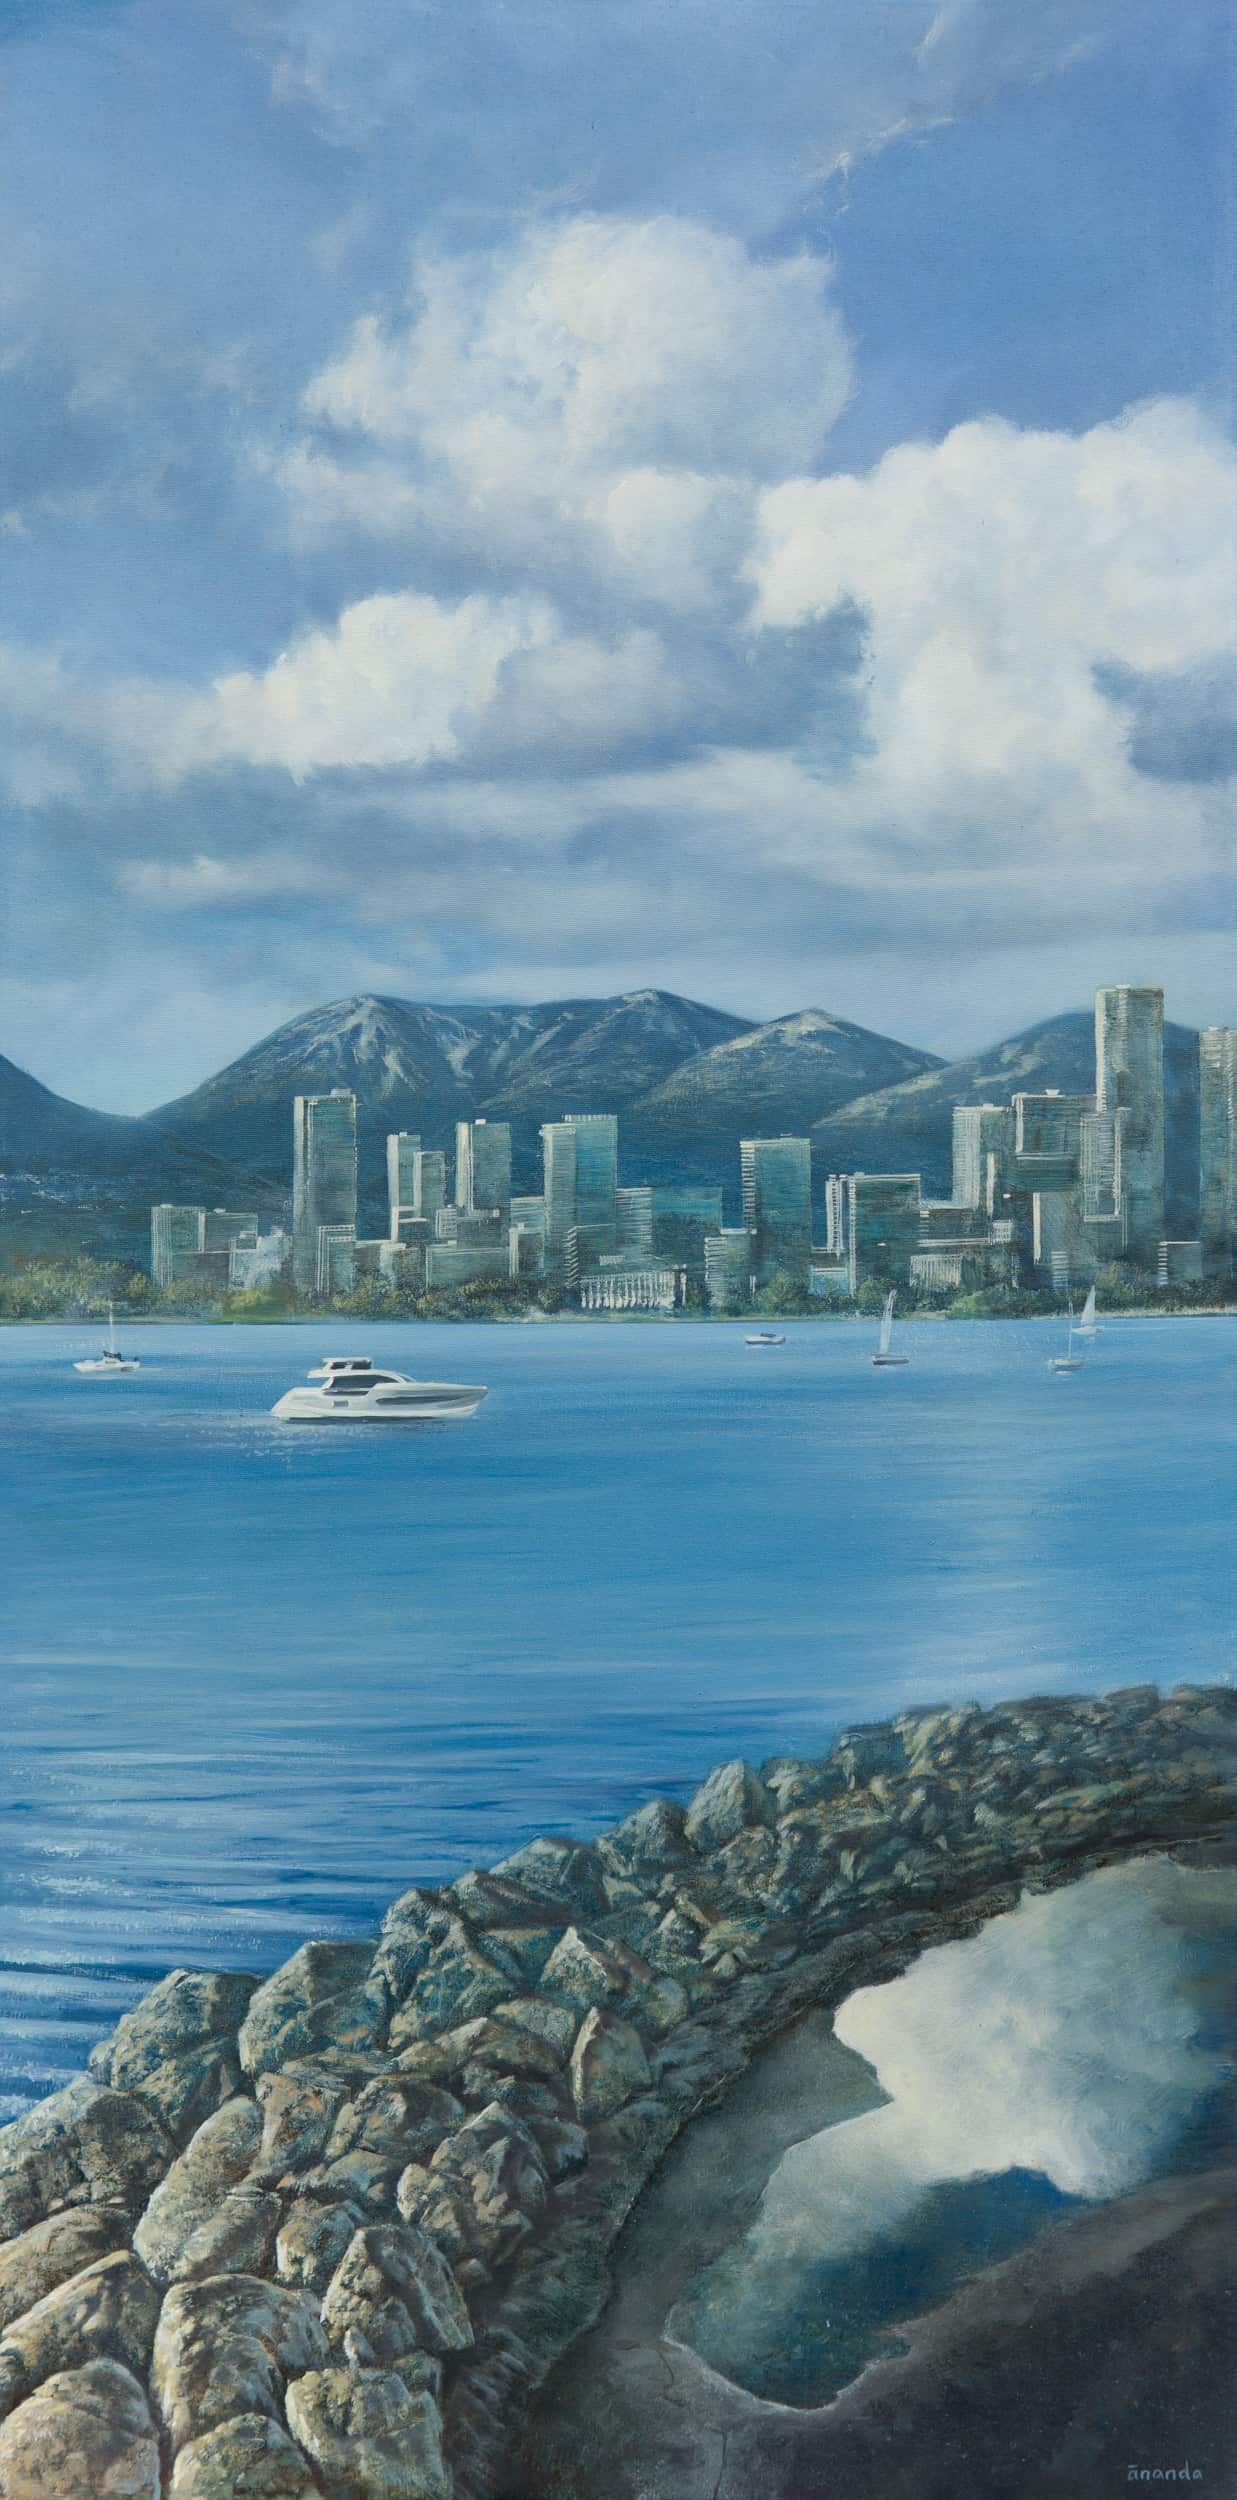 Contemporary Landscape Art. Title: Fair wind, Oil on Canvas, 48 x 24 in by Canadian Artist Ananda Dhama.